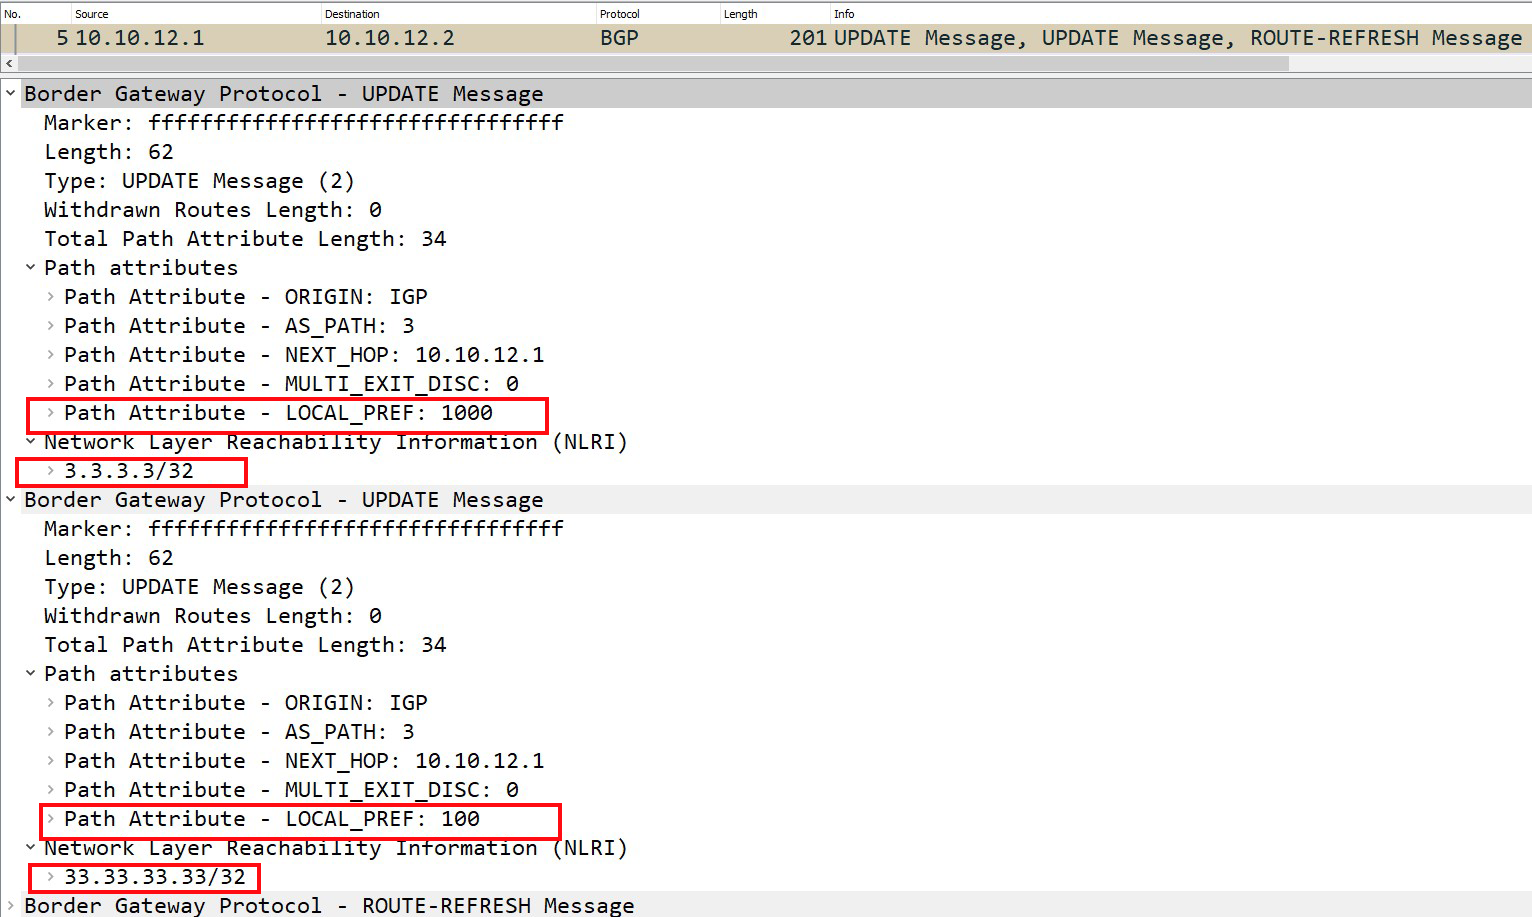 Wireshark capture of a BGP update message from R1 to R2 showing increased local preference for specific networks.